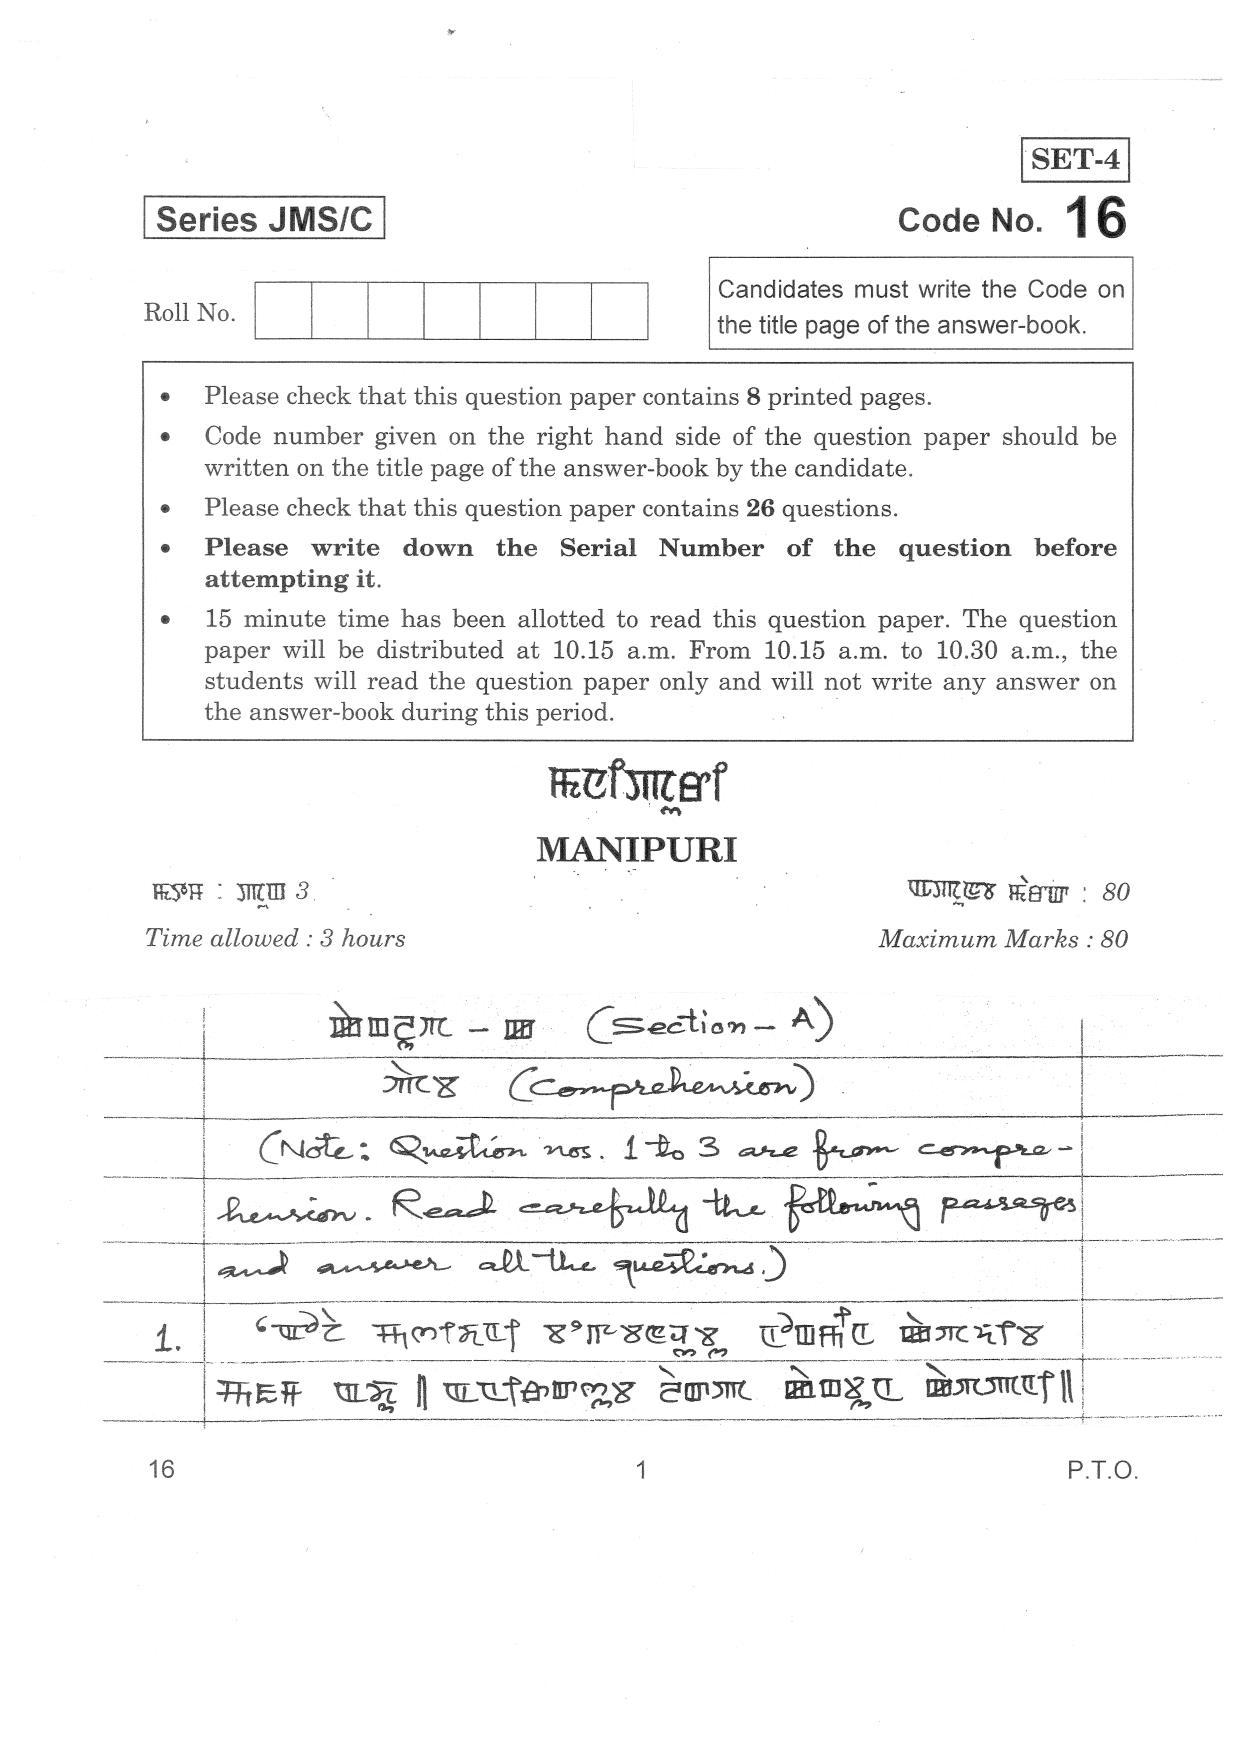 CBSE Class 10 16 Manipuri 2019 Compartment Question Paper - Page 1